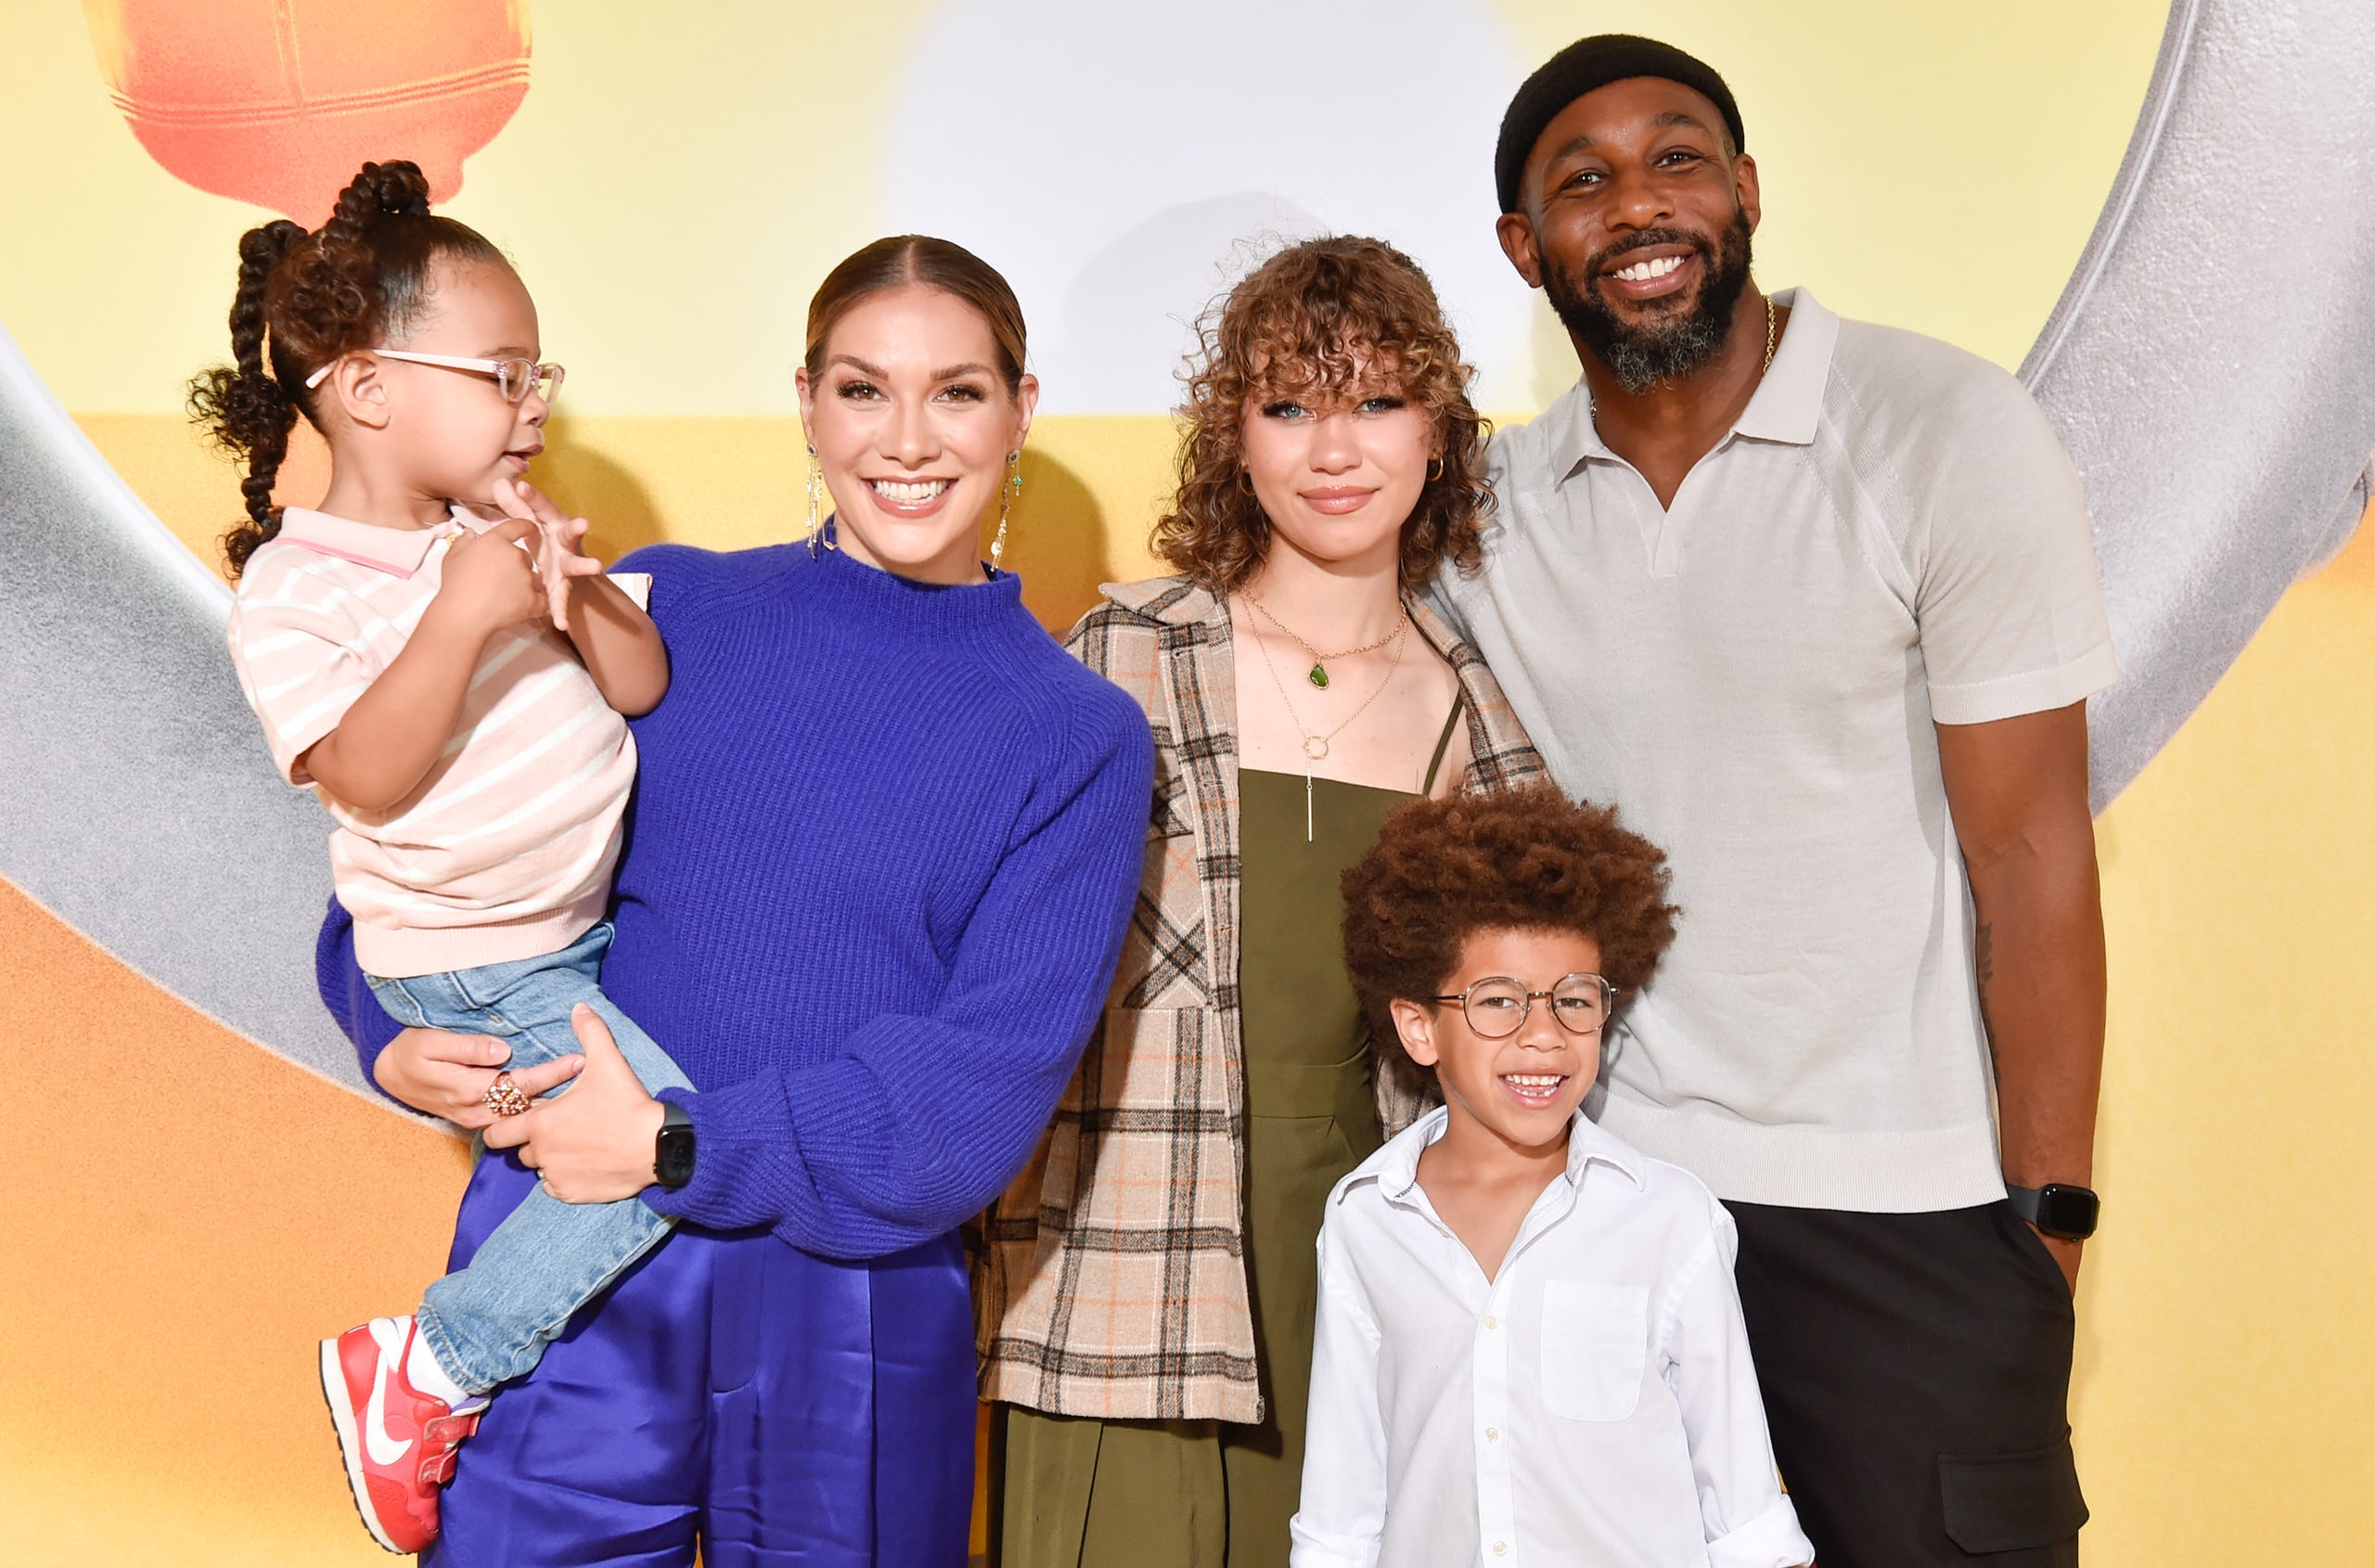 Dancers Stephen "tWitch" Boss and Allison Holker with their children Zaia, Weslie and Maddox at a movie premiere on June 25, 2022 in Hollywood, California.